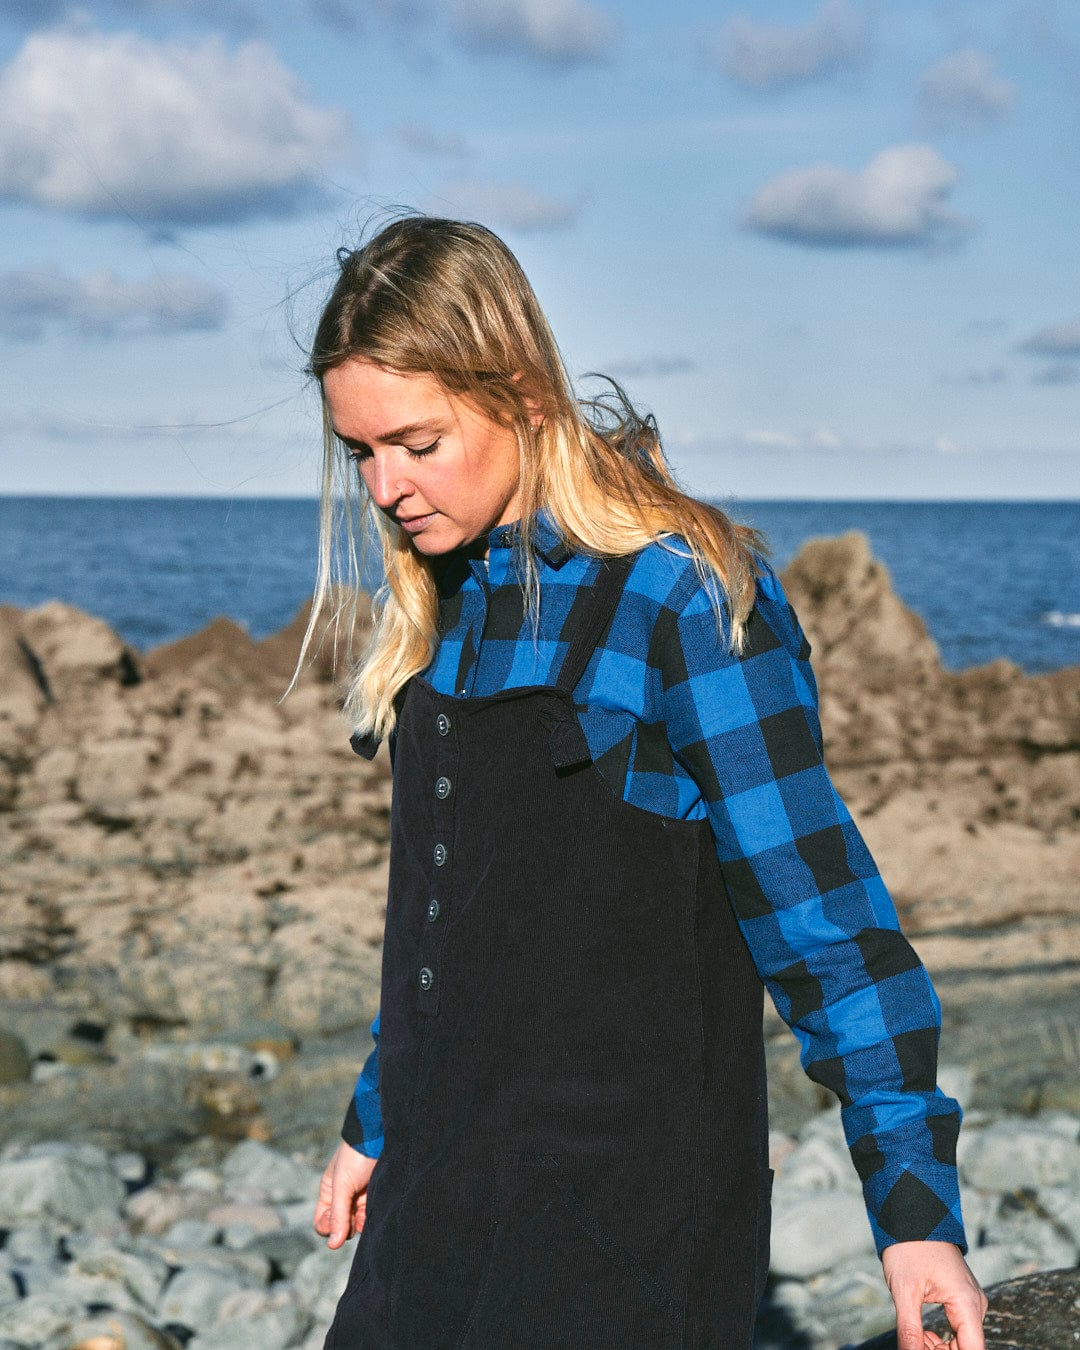 A woman wearing a stylish Saltrock Nancy - Womens Cord Dungaree - Dark Blue in a blue and black plaid shirt standing on rocks near the ocean.